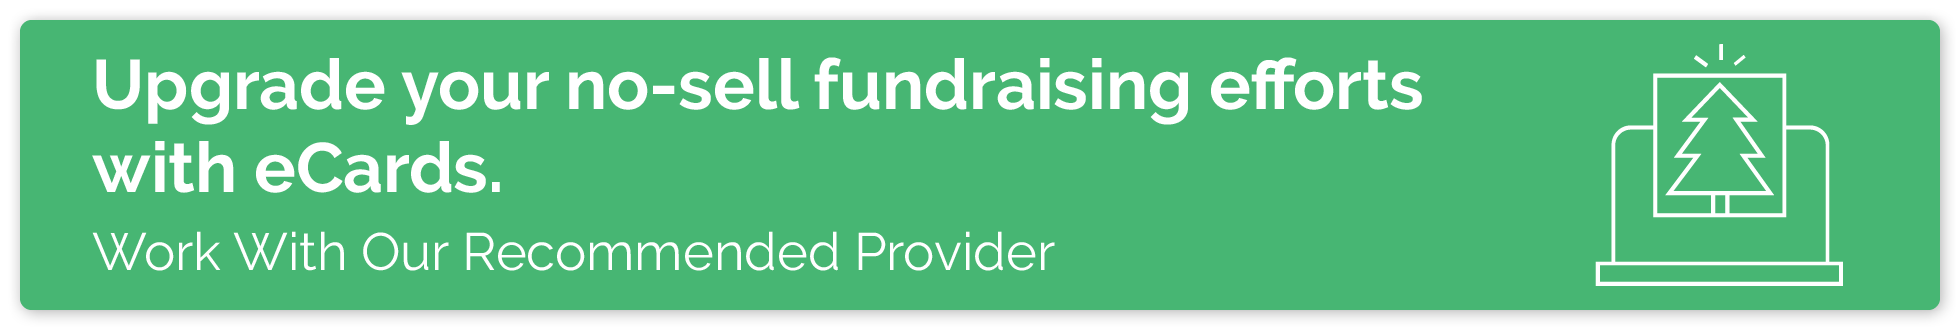 Work with our recommended eCard software provider to leverage eCard fundraisers.